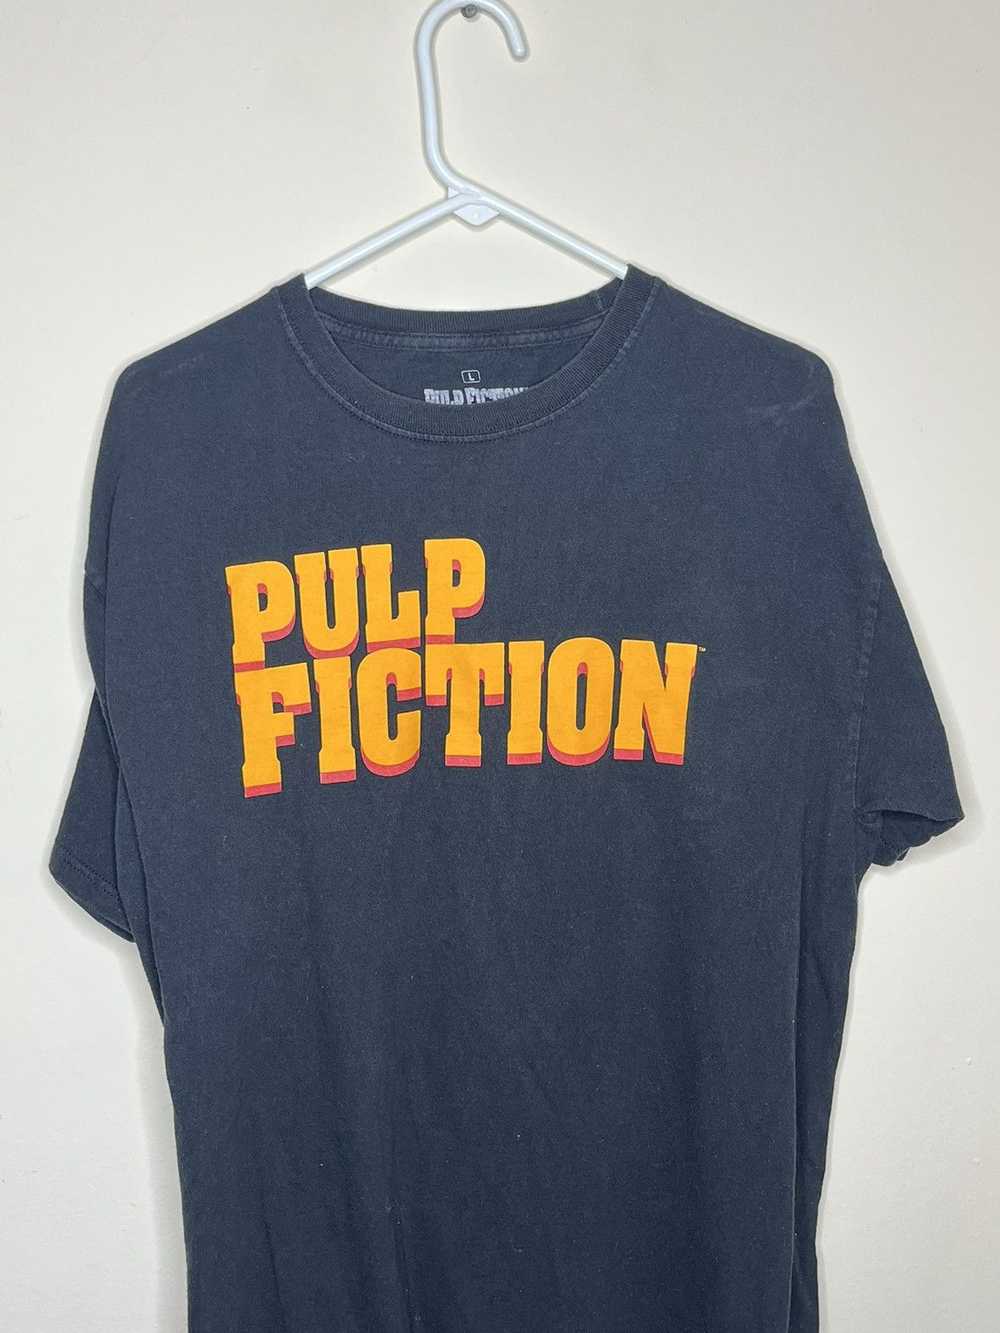 Other Pulp Fiction Vintage Tee - image 1